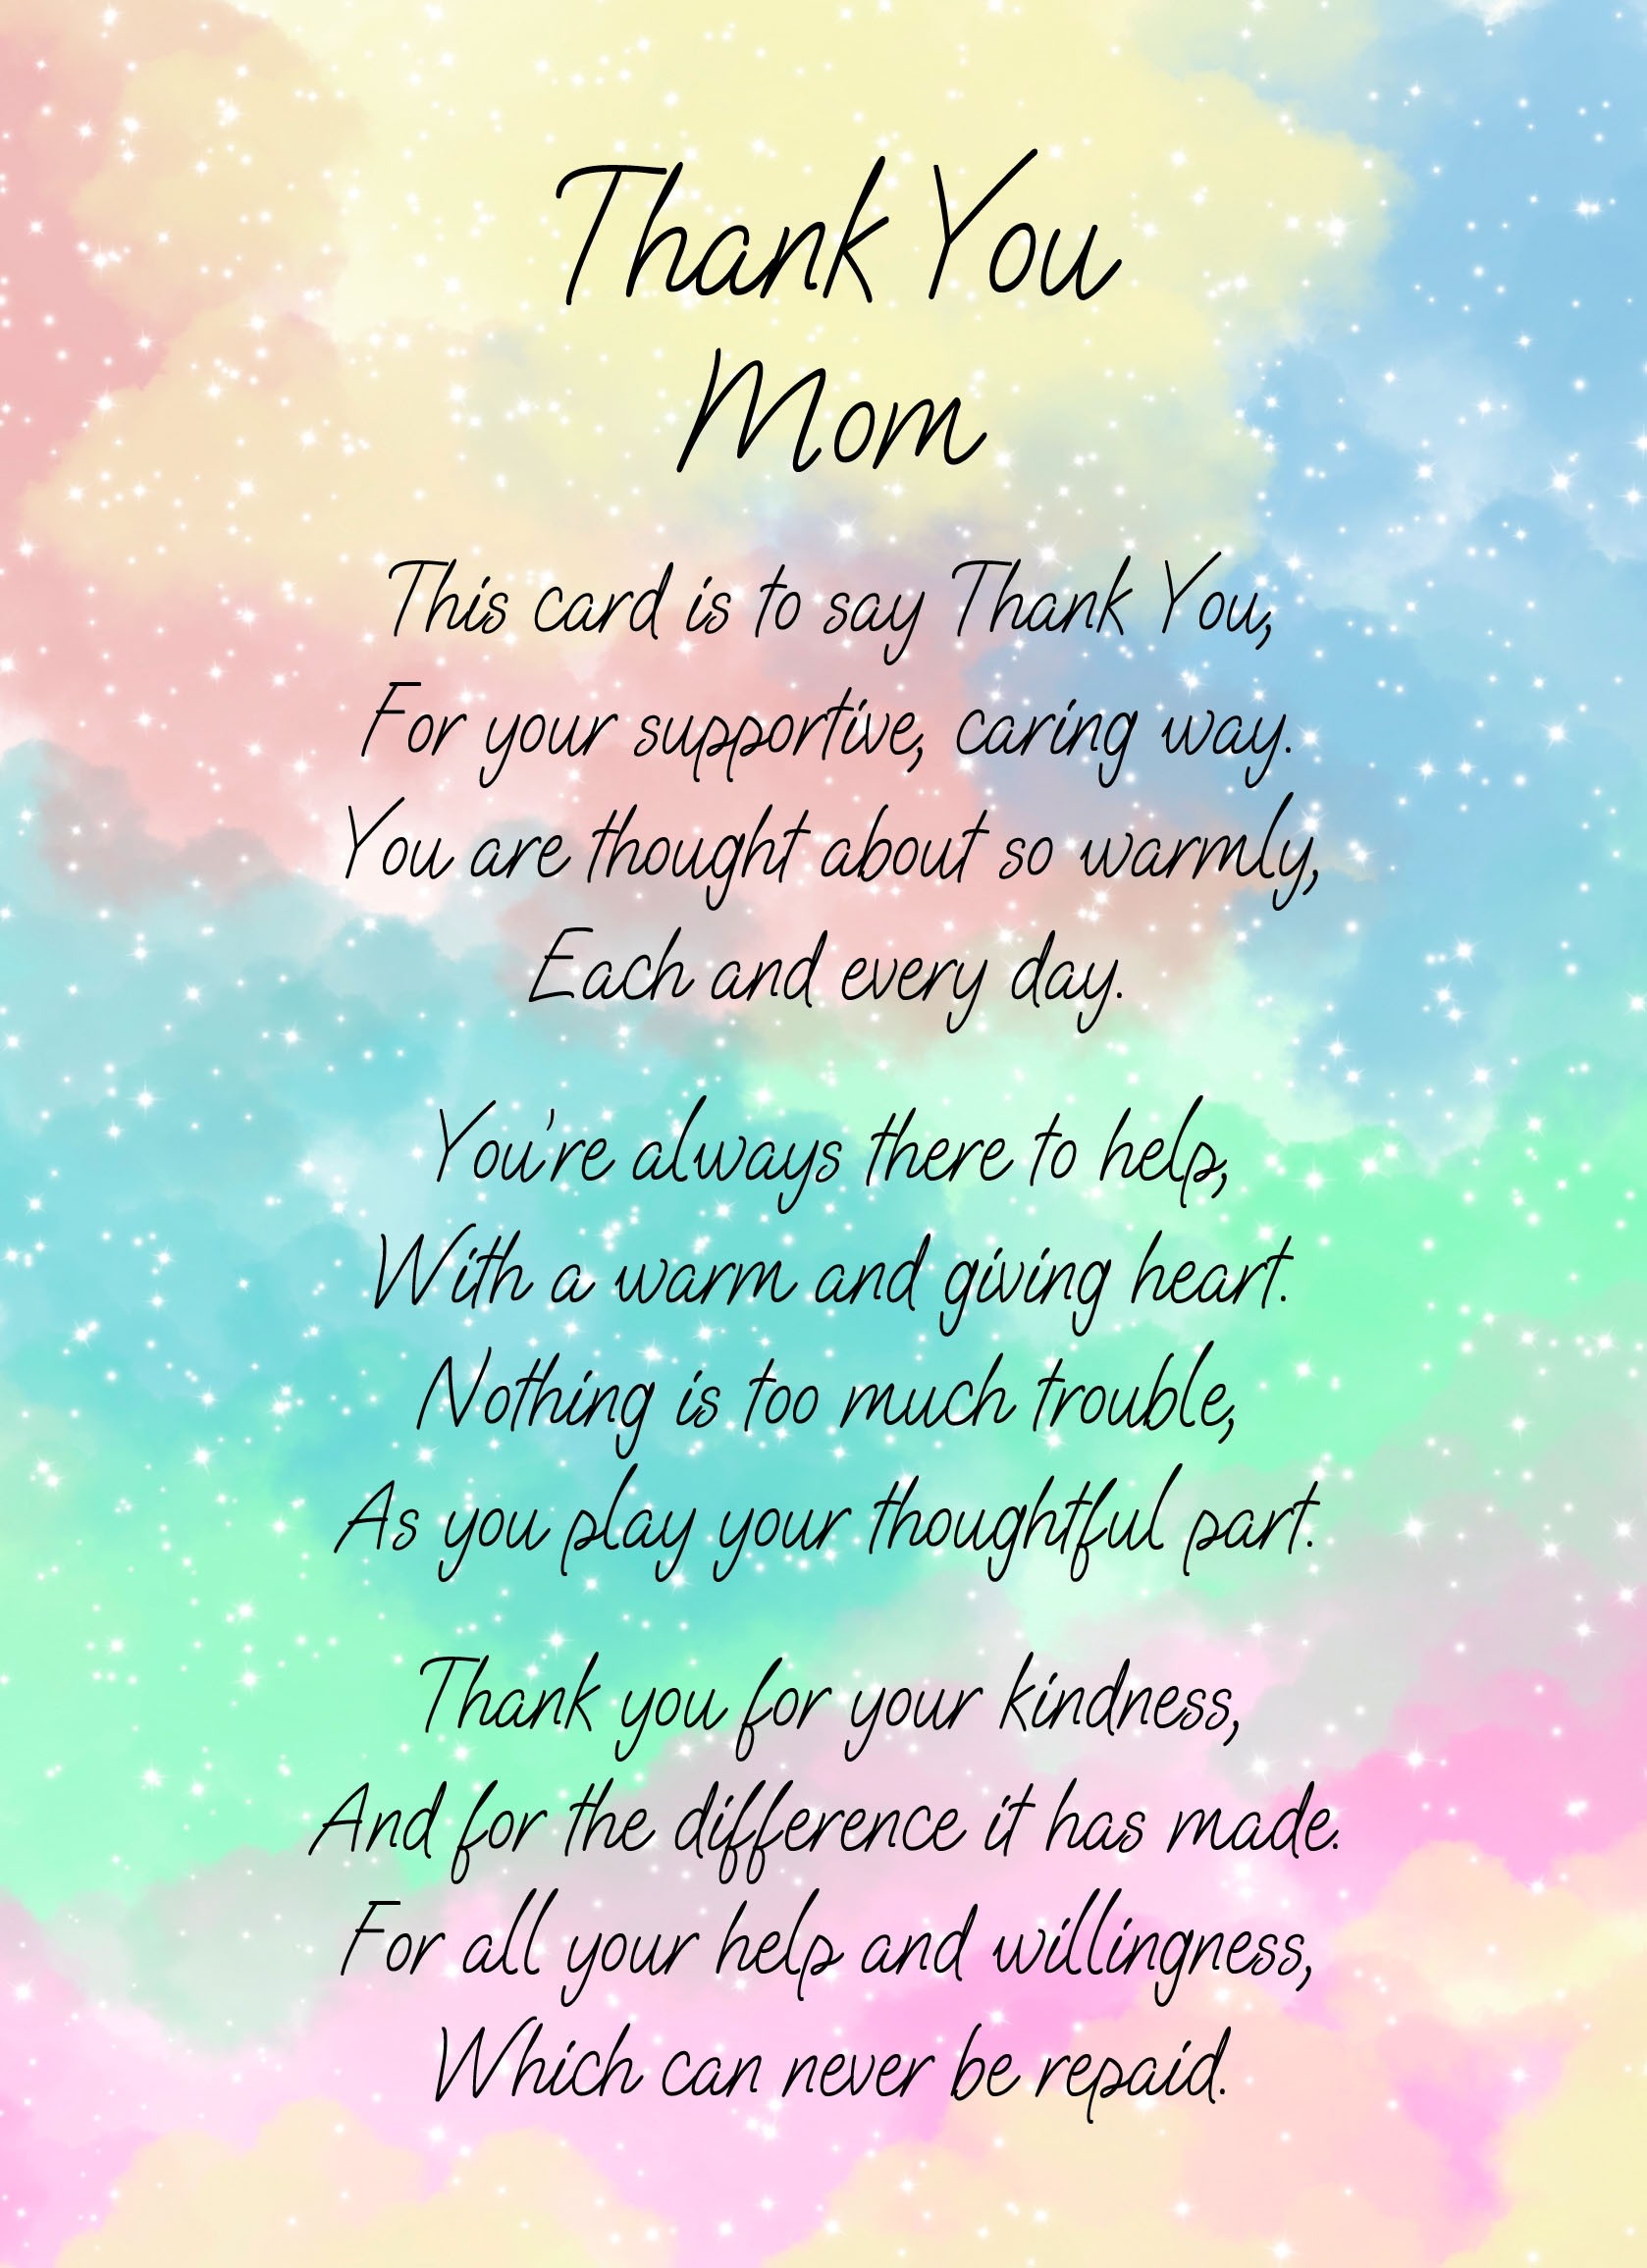 Thank You Poem Verse Card For Mom